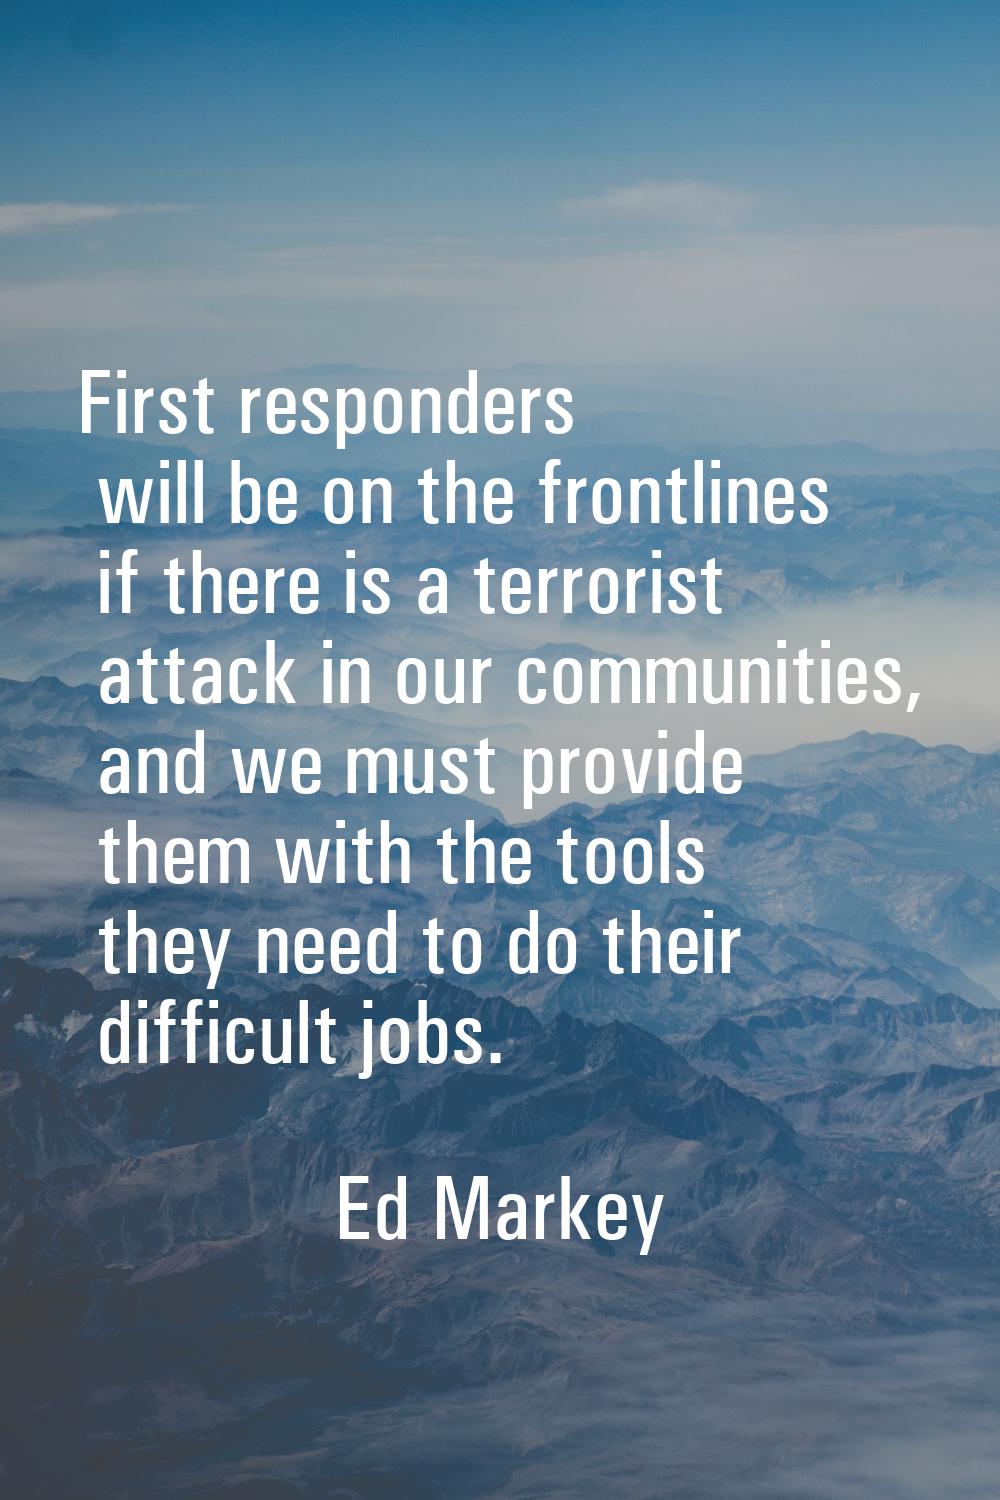 First responders will be on the frontlines if there is a terrorist attack in our communities, and w